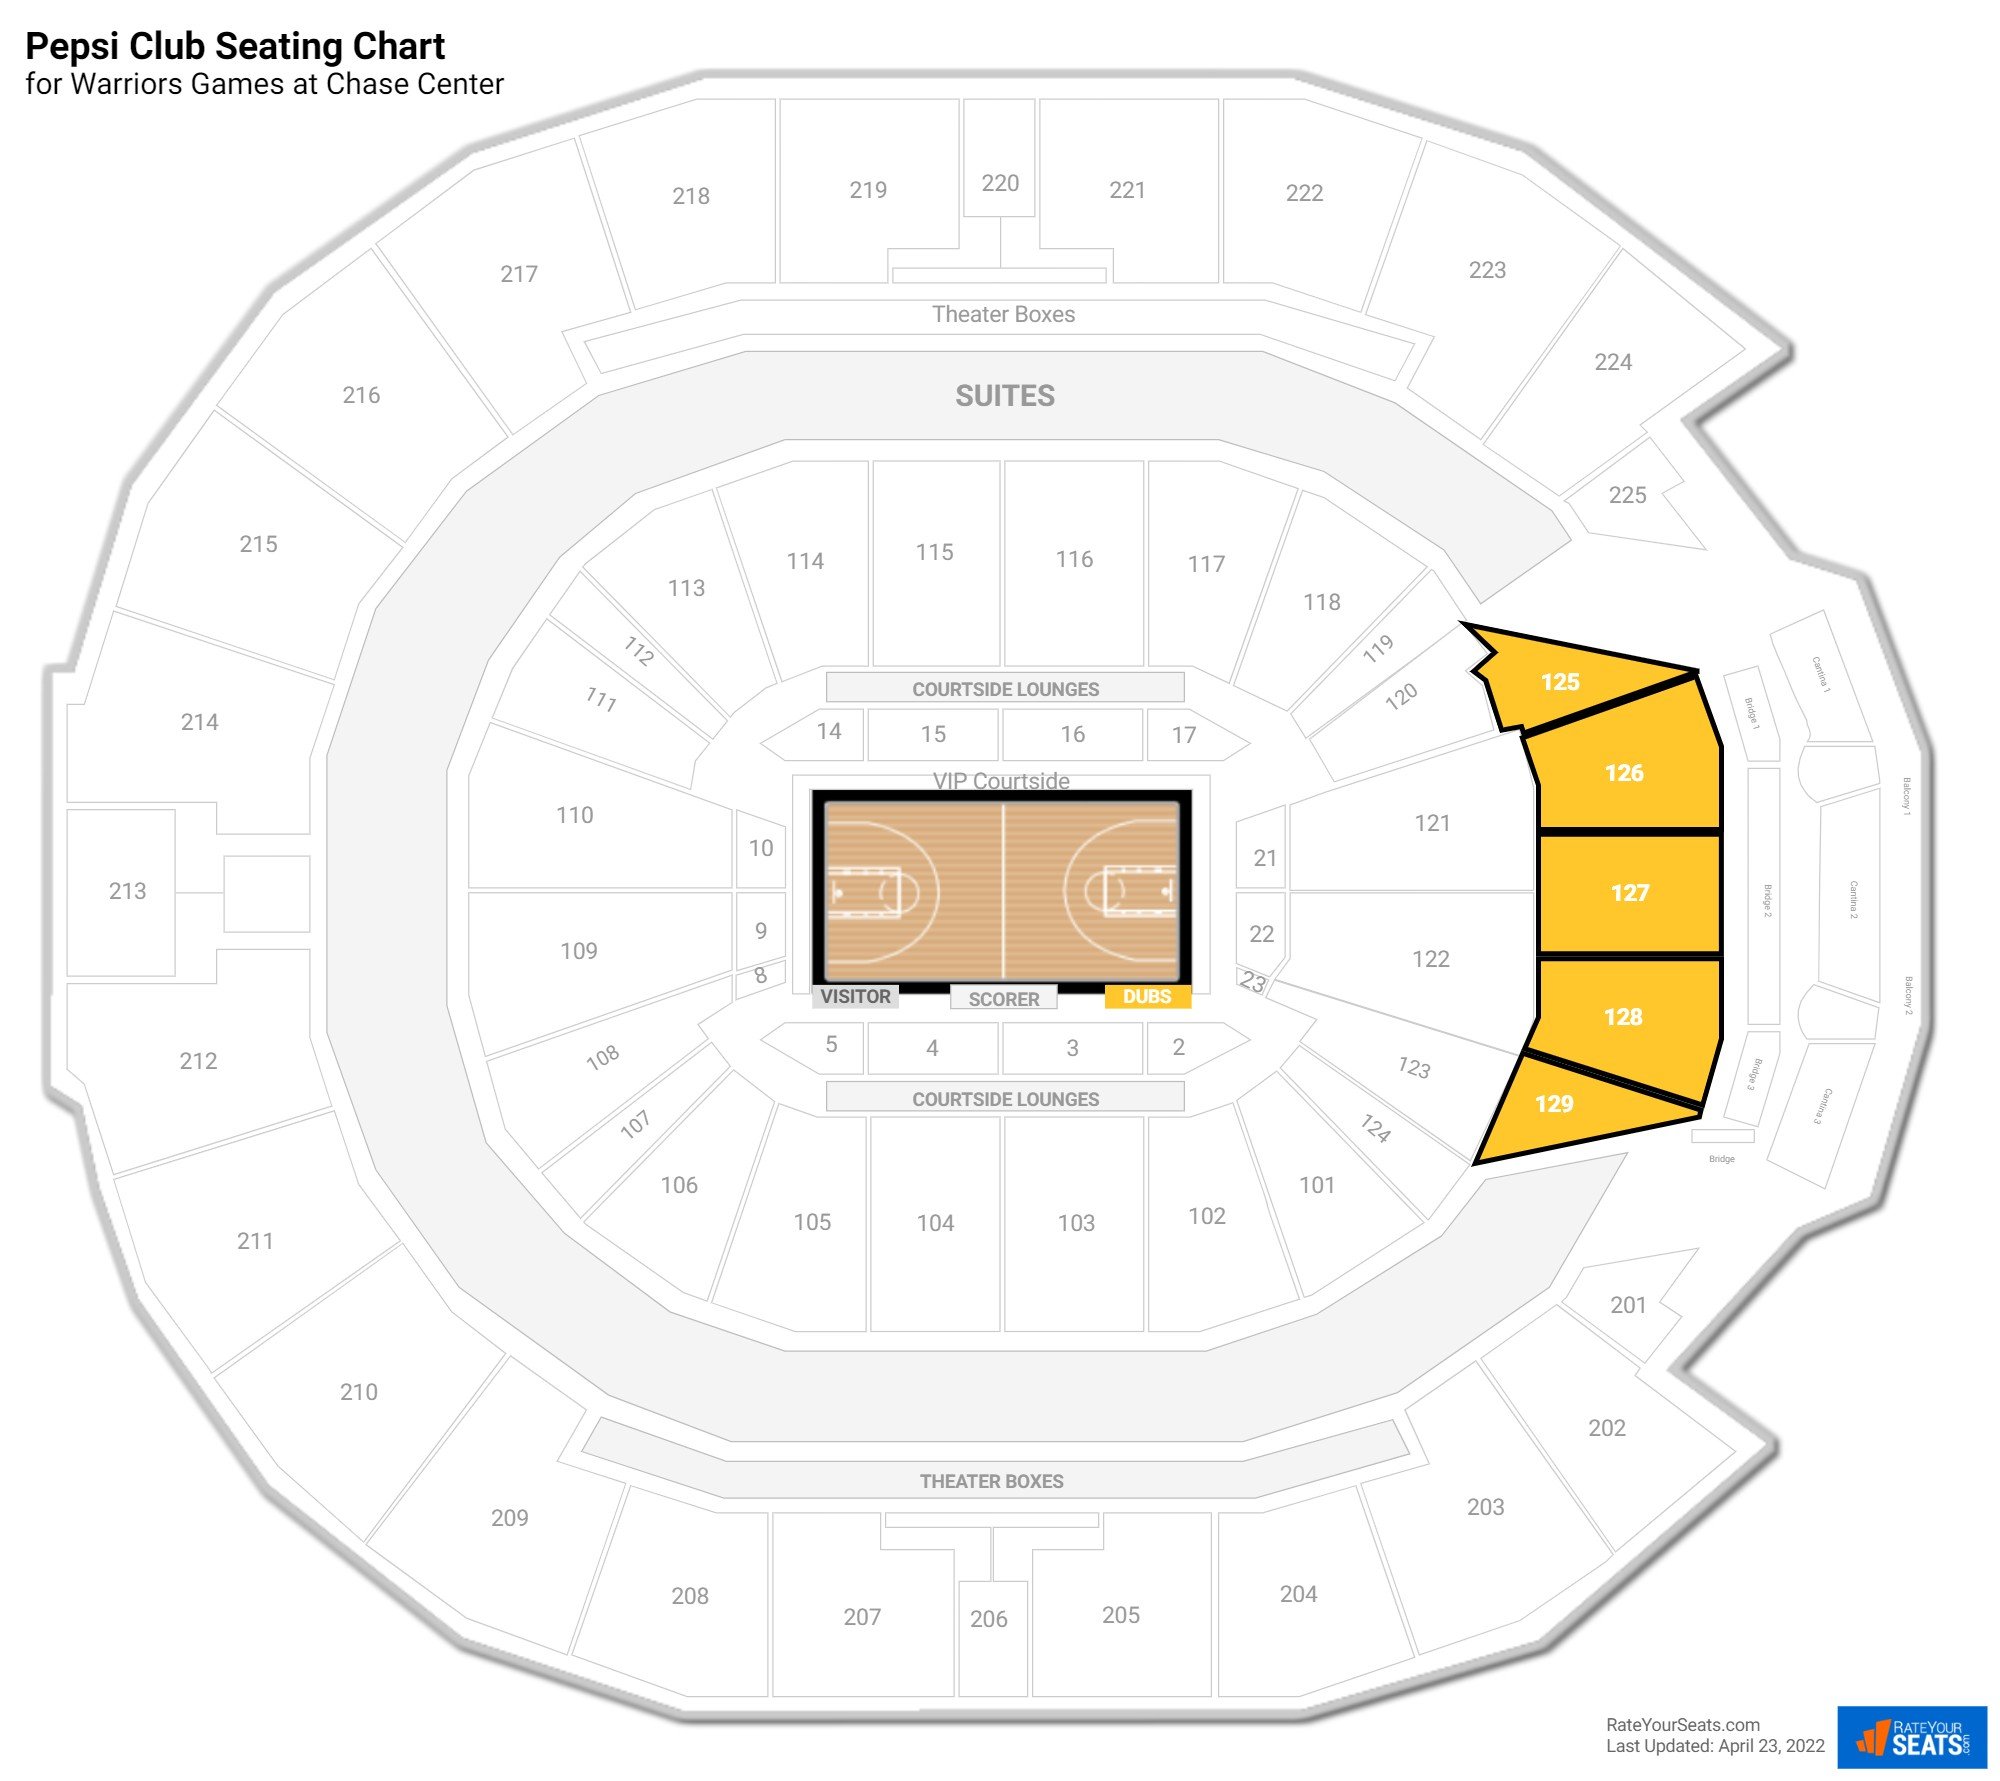 Warriors Pepsi Club Seating Chart at Chase Center